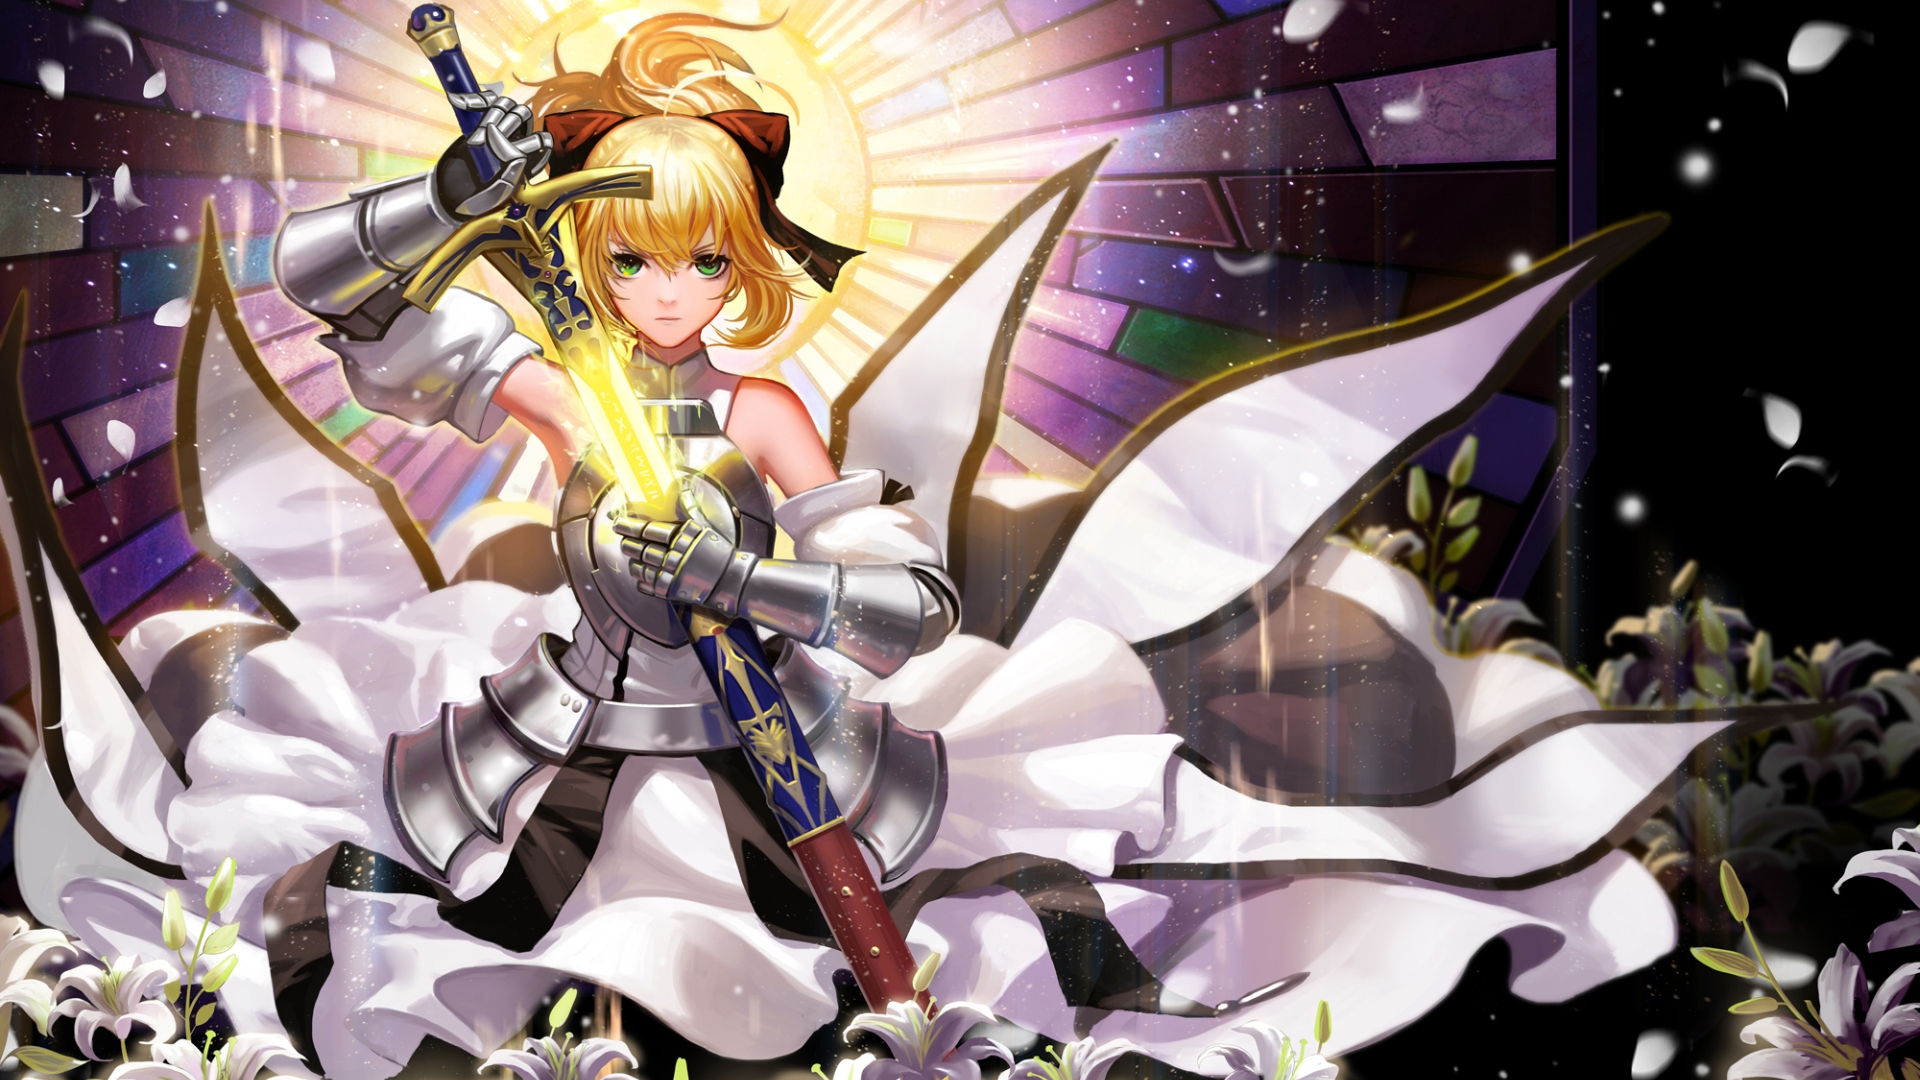 Fate Stay Night Anime Girls Armored Saber Saber Fate Grand Order 1920x1080